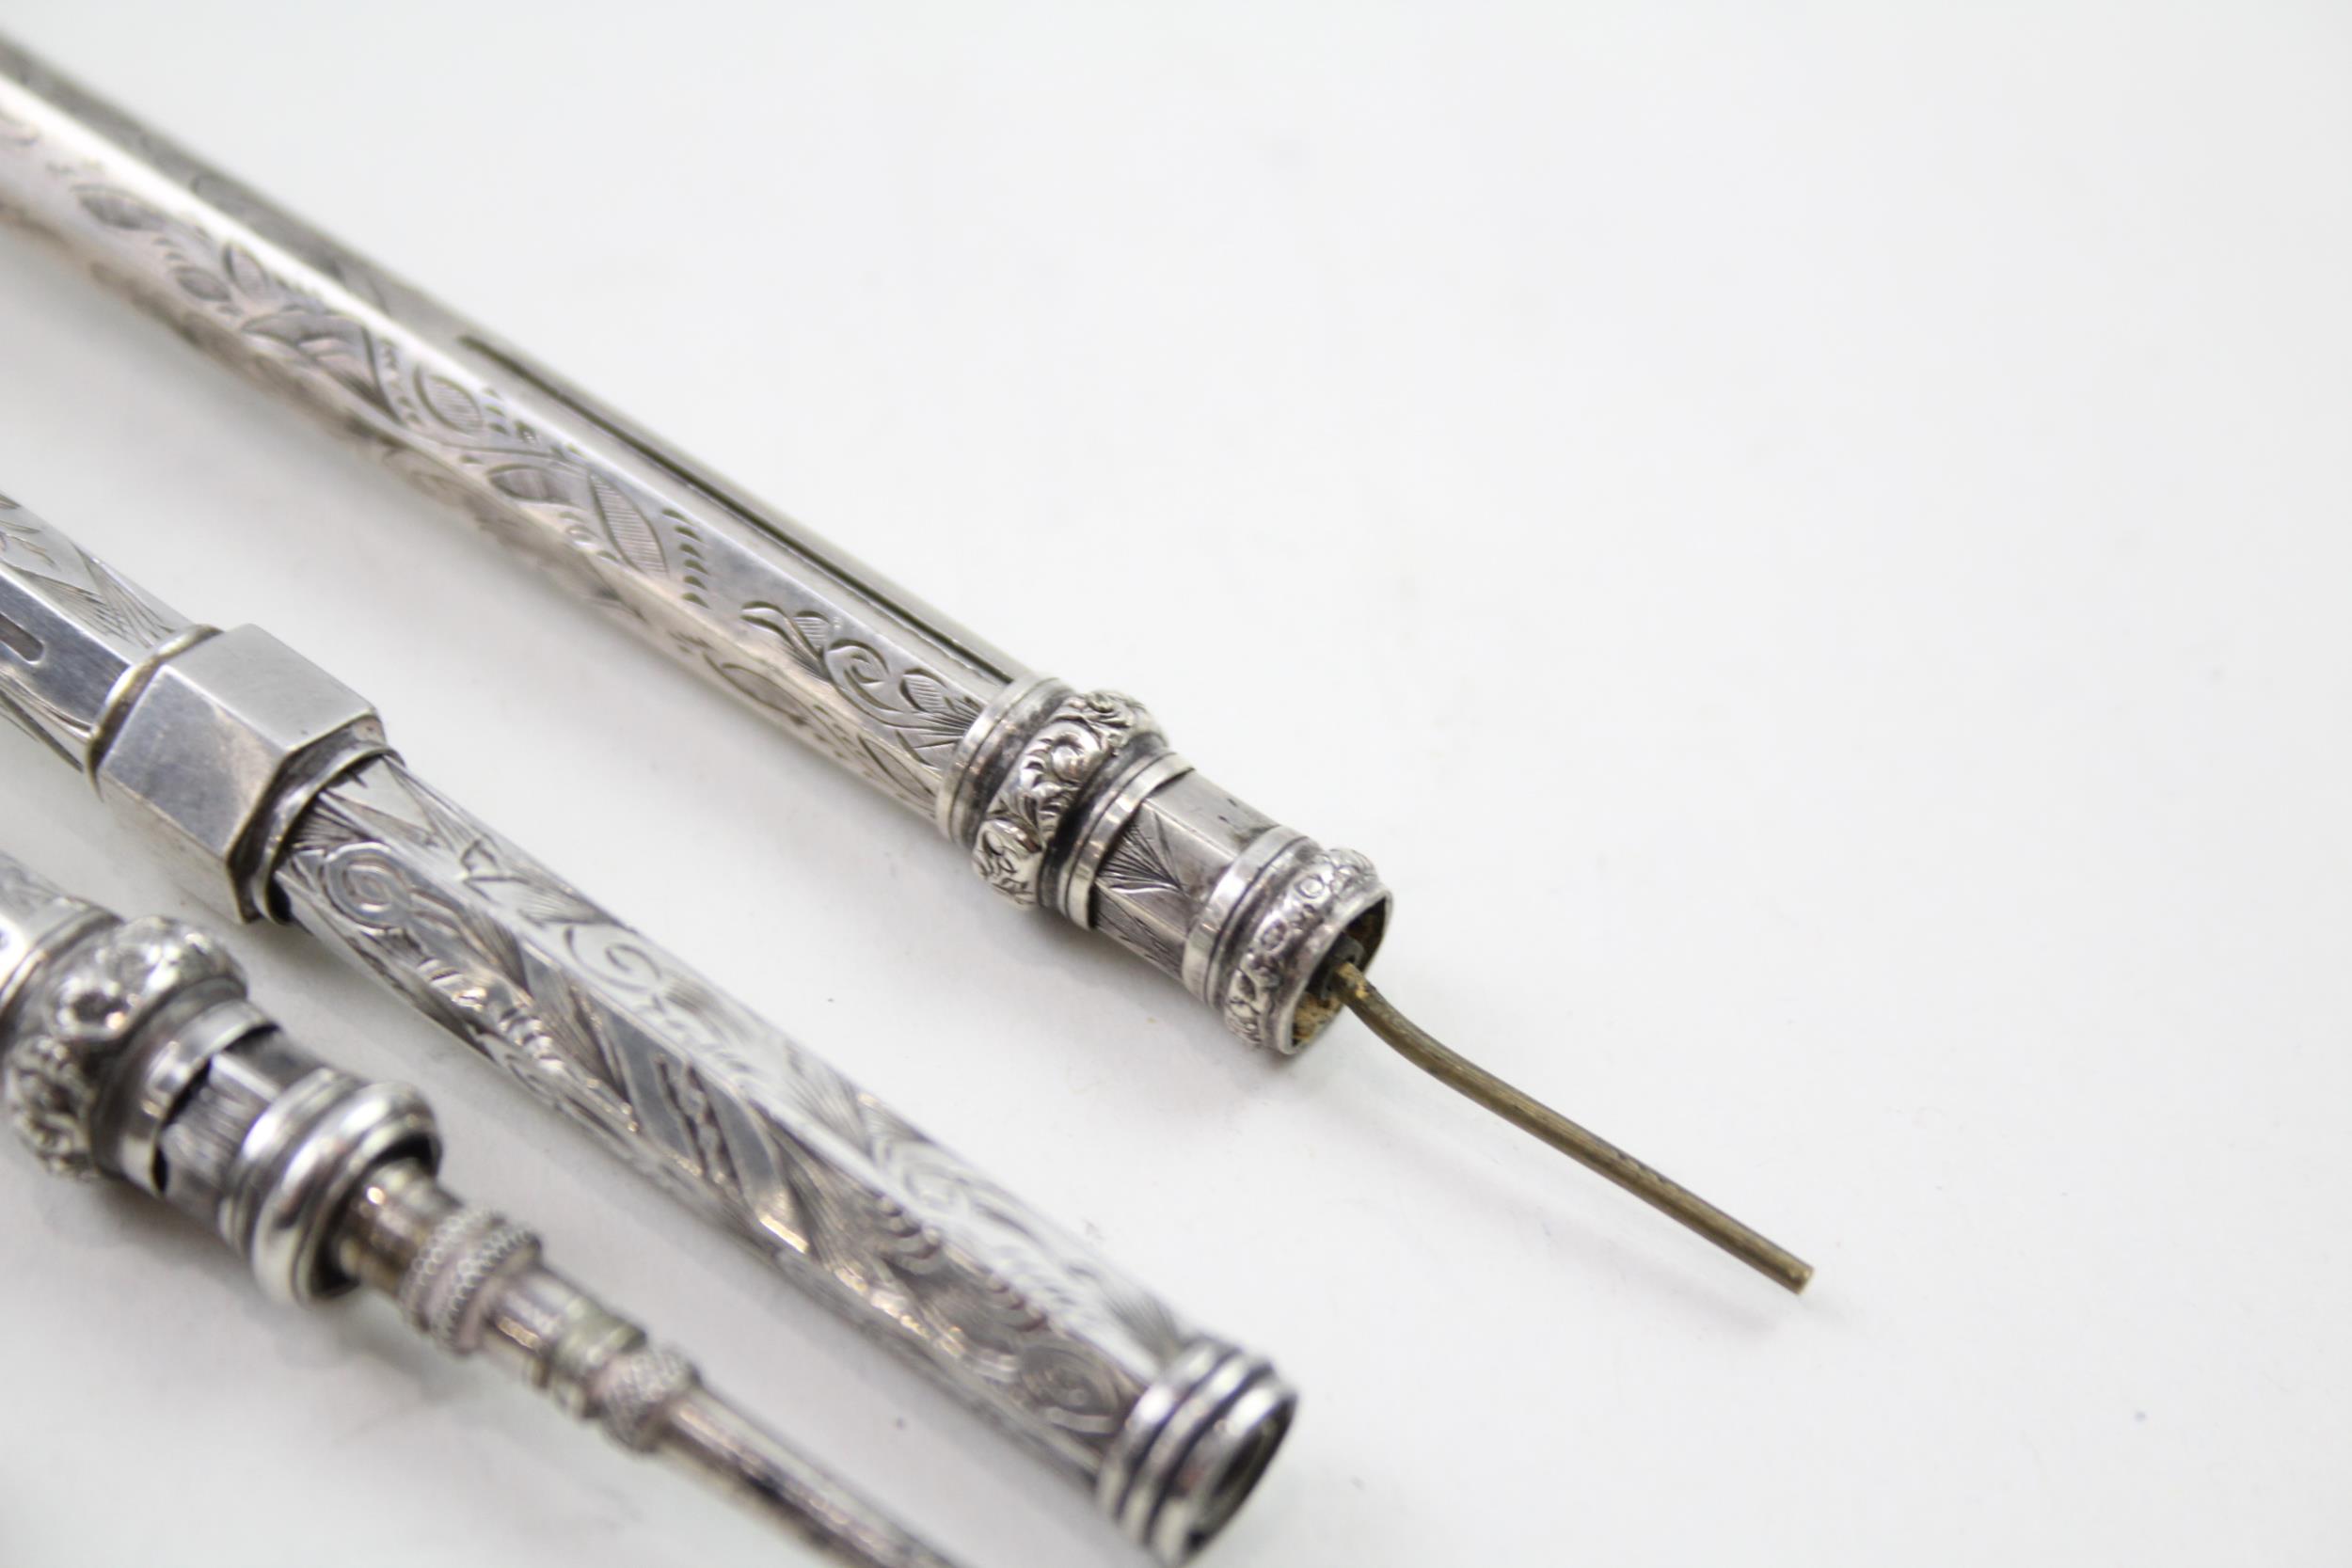 4 x Antique / Vintage .800 SILVER Pencils & Dipping Nib w/ Wax Seals (58g) - Untested XRF TESTED FOR - Image 5 of 6